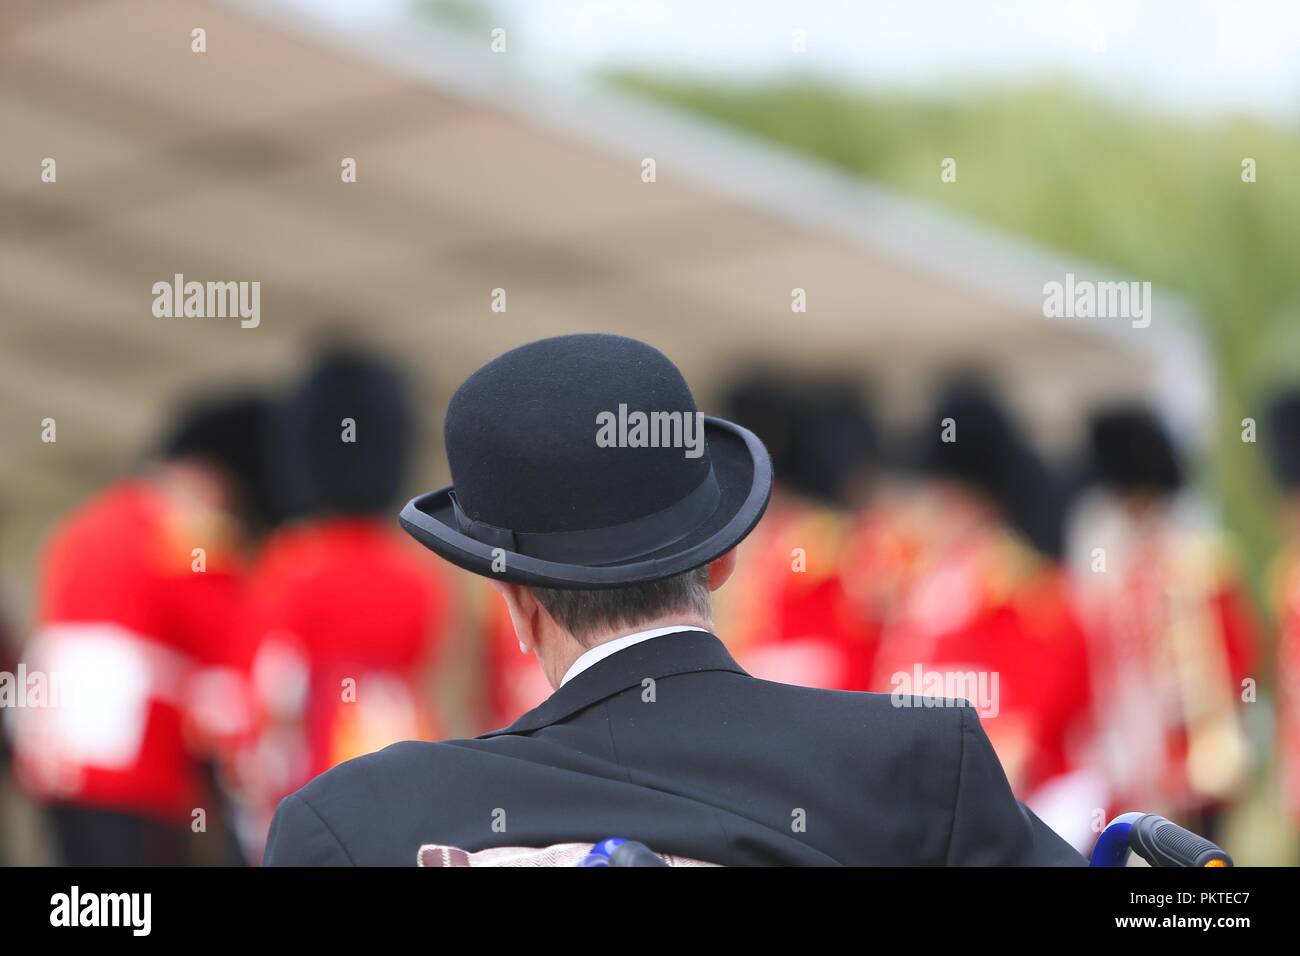 Worcester, Worcestershire, UK. 15th September 2018. An ex-serviceman wears a bowler hat at the Drumhead Service at Gheluvelt Park, Worcester. Peter Lopeman/Alamy Live News Stock Photo